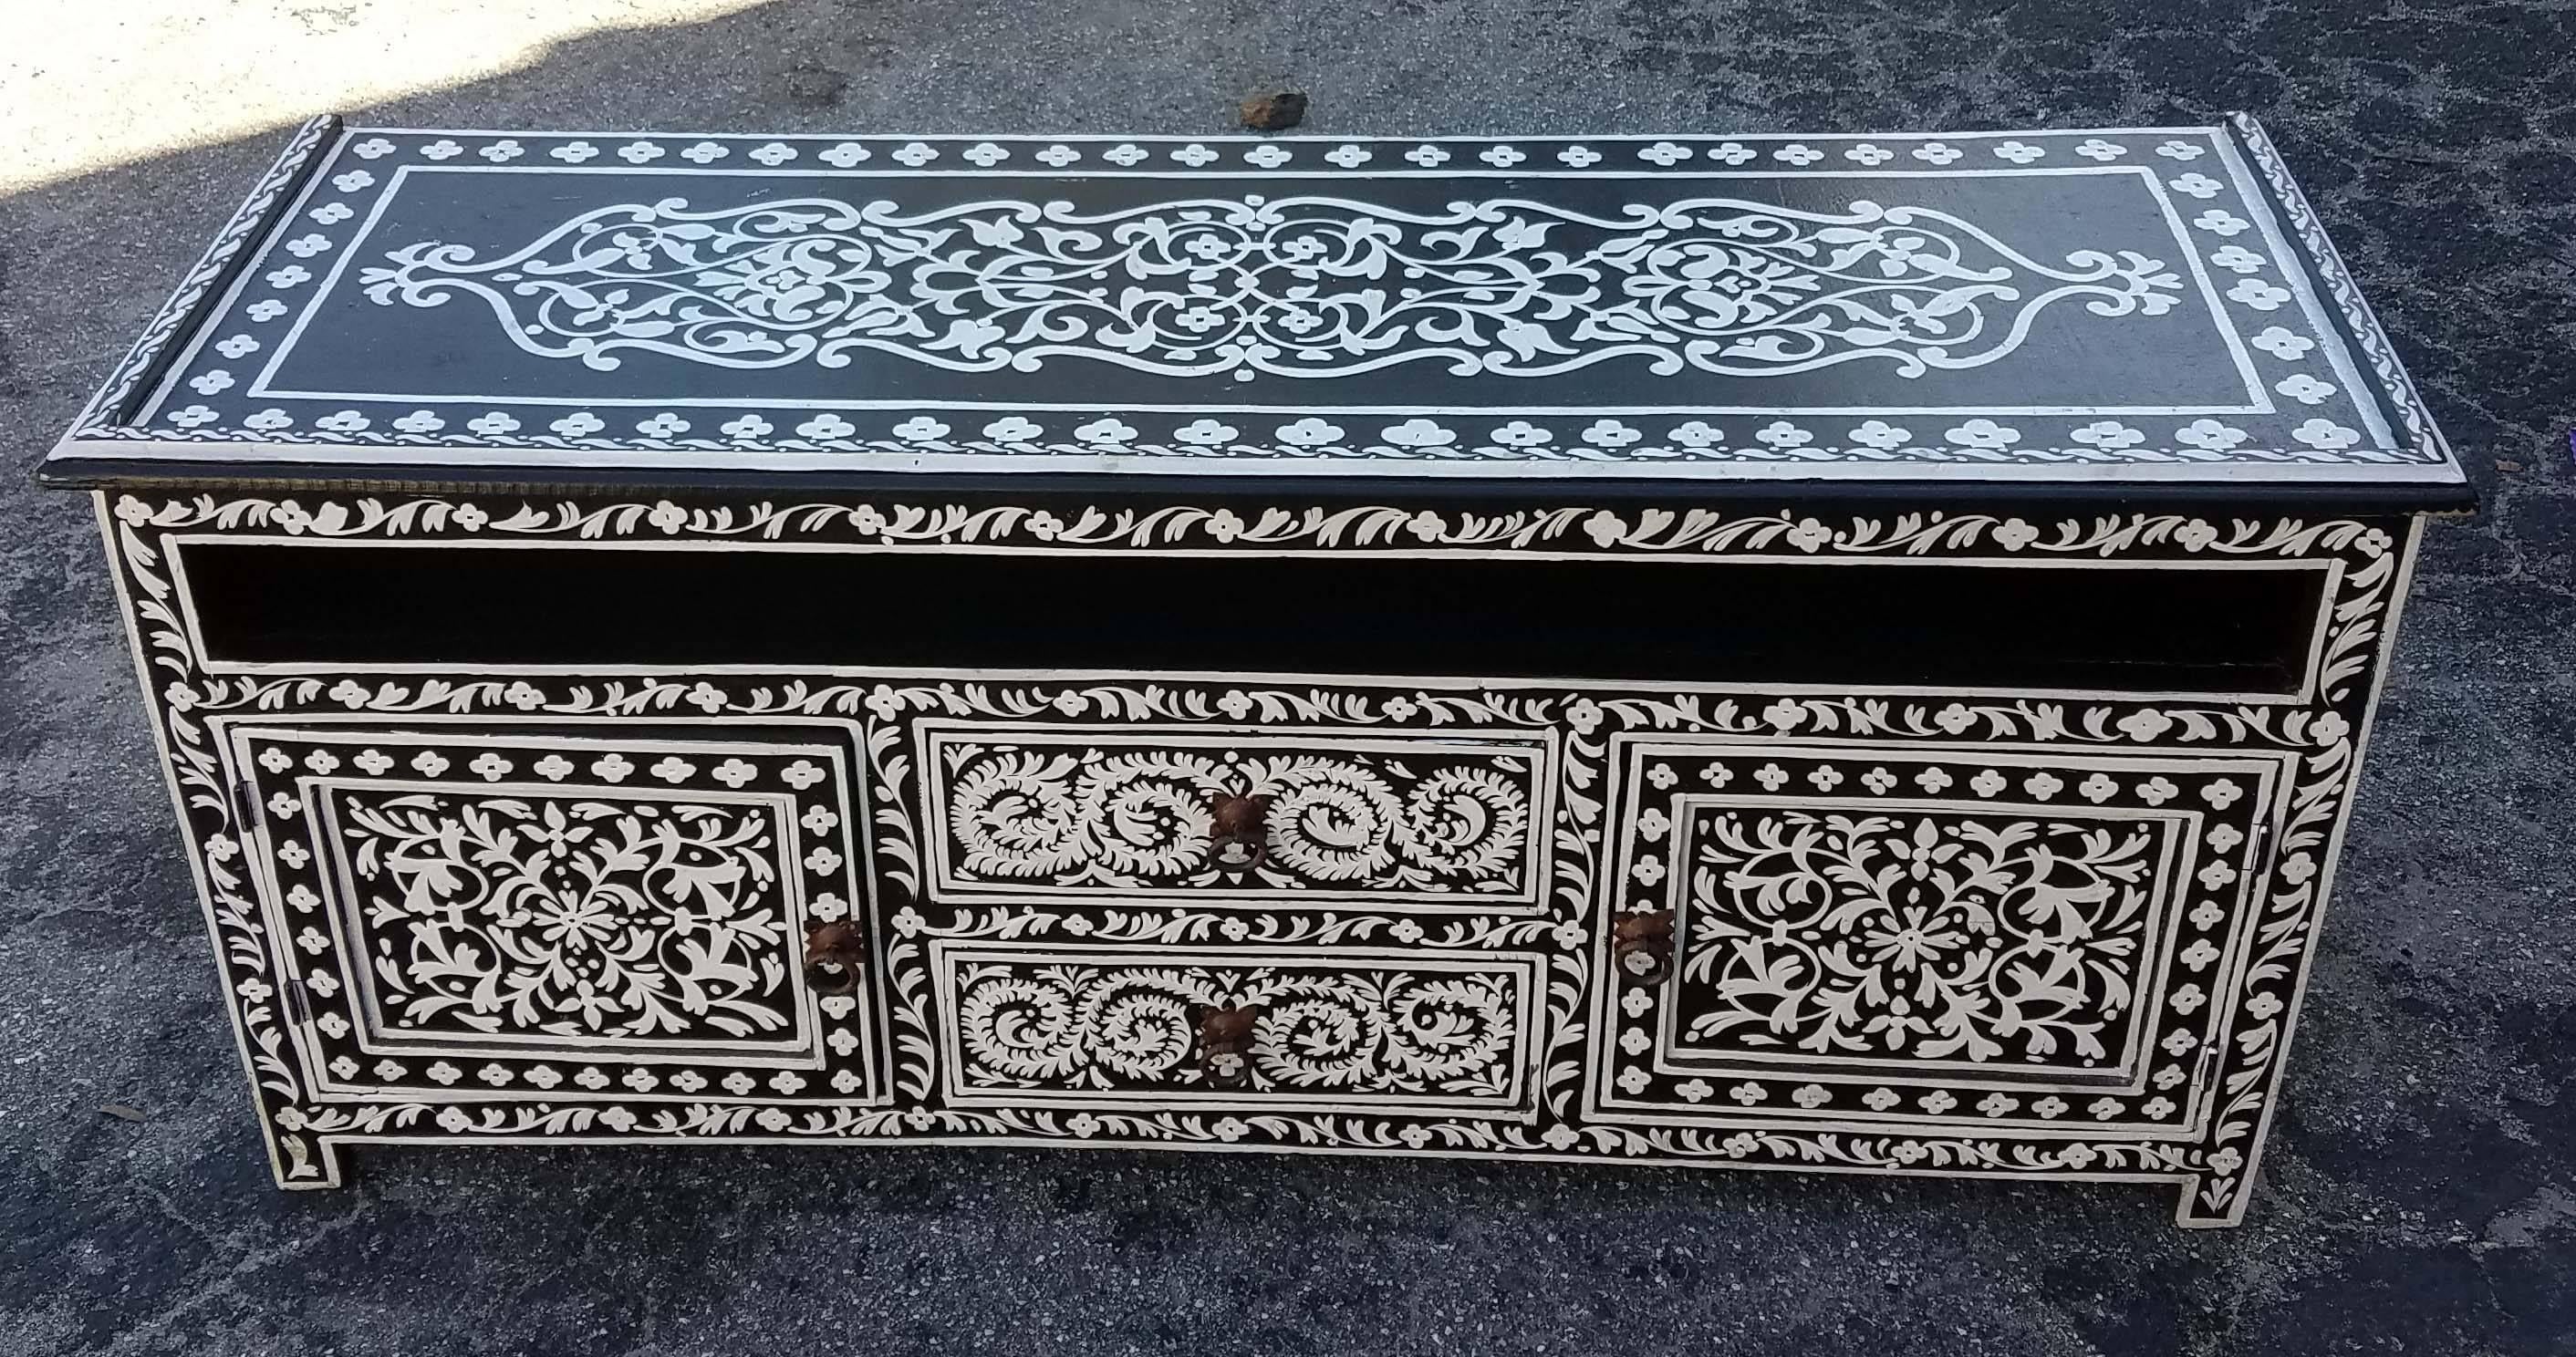 Beautifully hand-painted Moroccan wooden media stand. With its detailed handcraftsmanship along the sides and the top, this cabinet will sure be a excellent add-on to your décor. It measures approximately 48